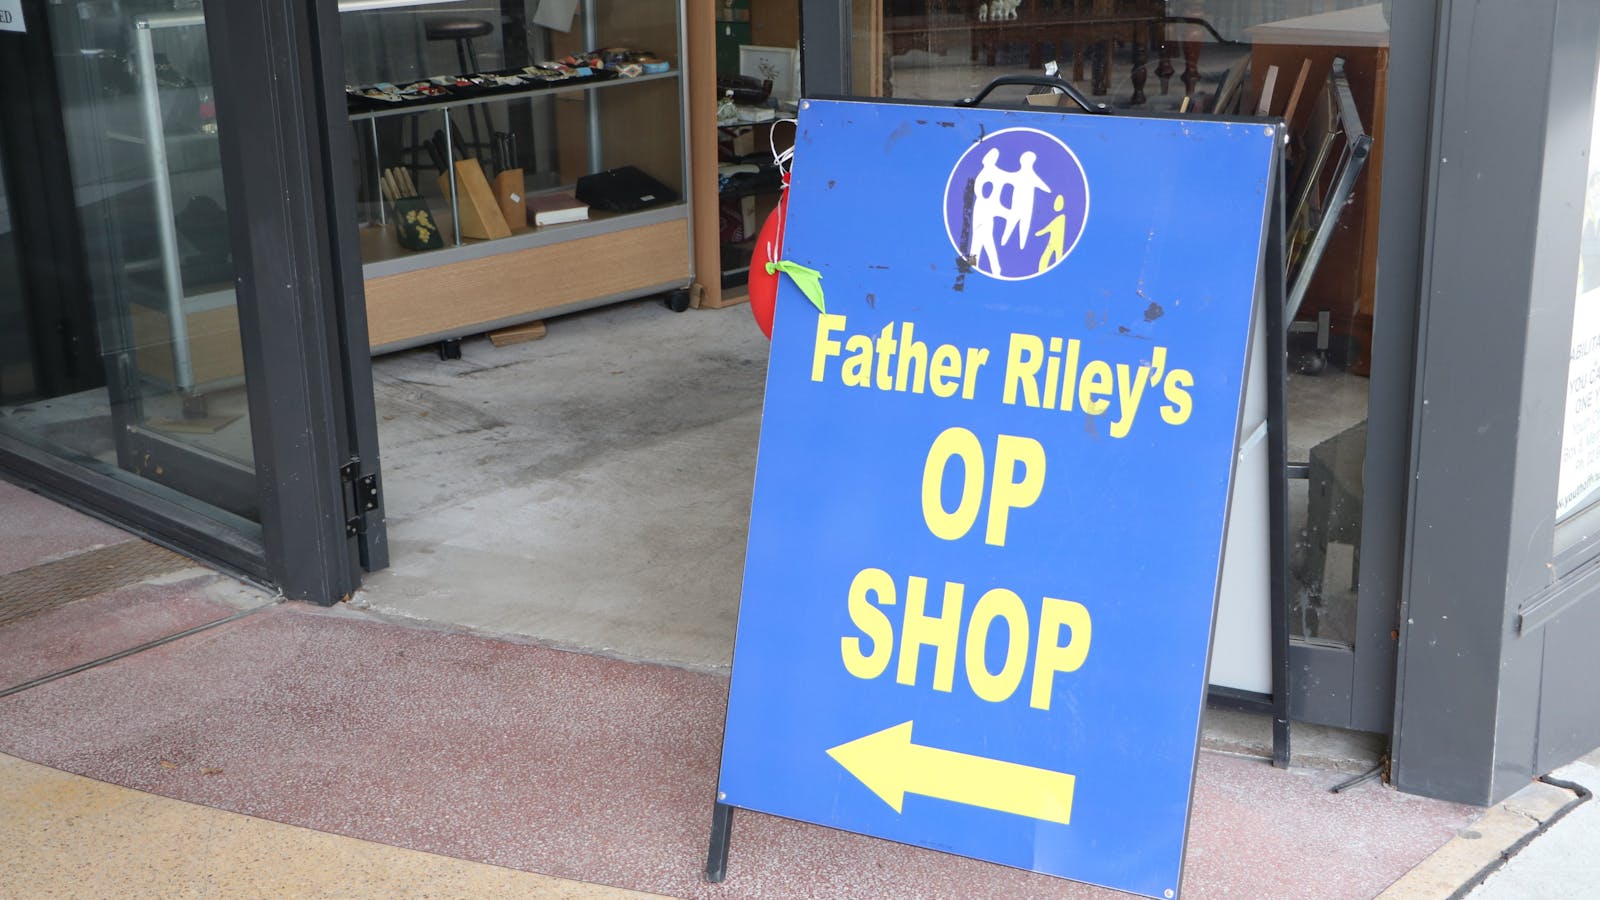 Father Riley's Op Shop